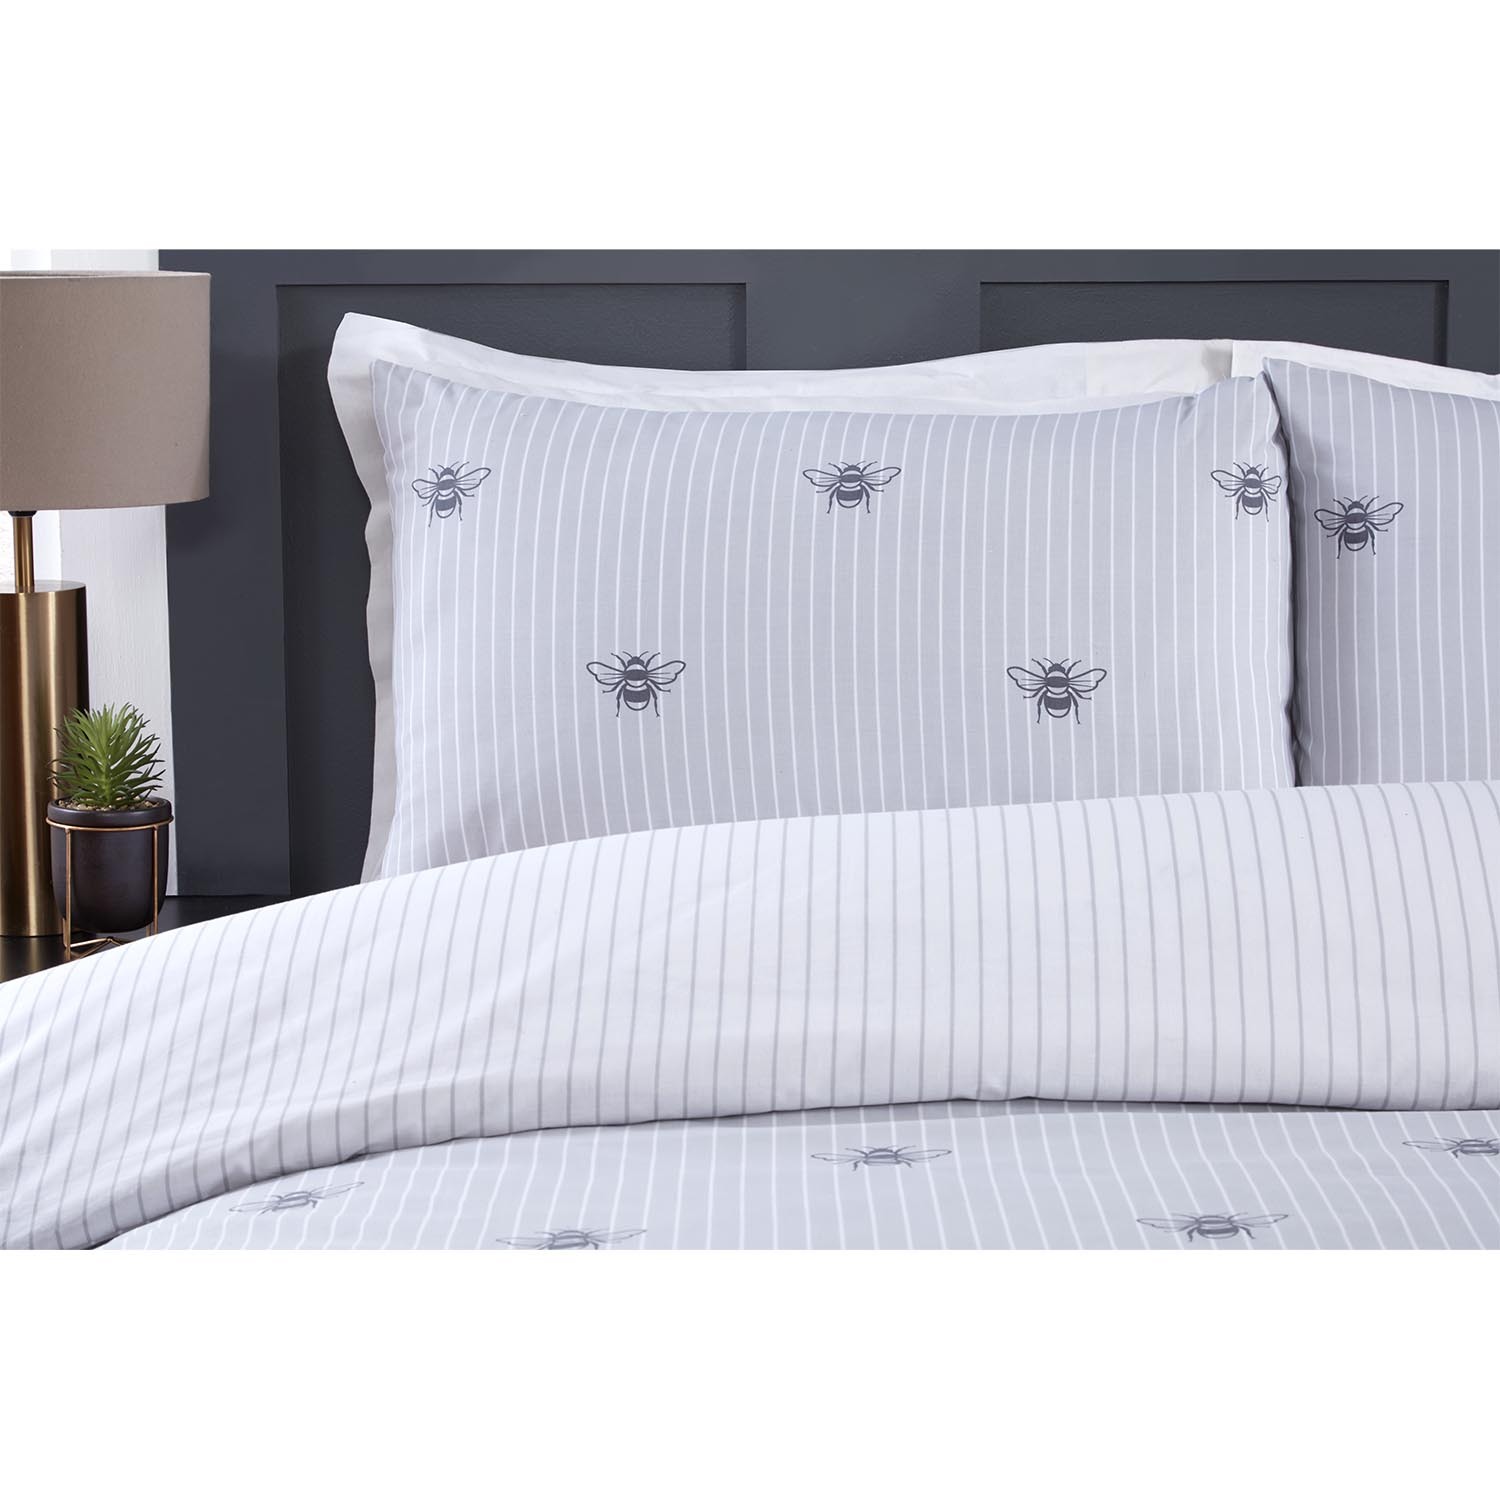 Divante King Size Betsy Bee Stripe Duvet Cover and Pillowcase Set Image 3